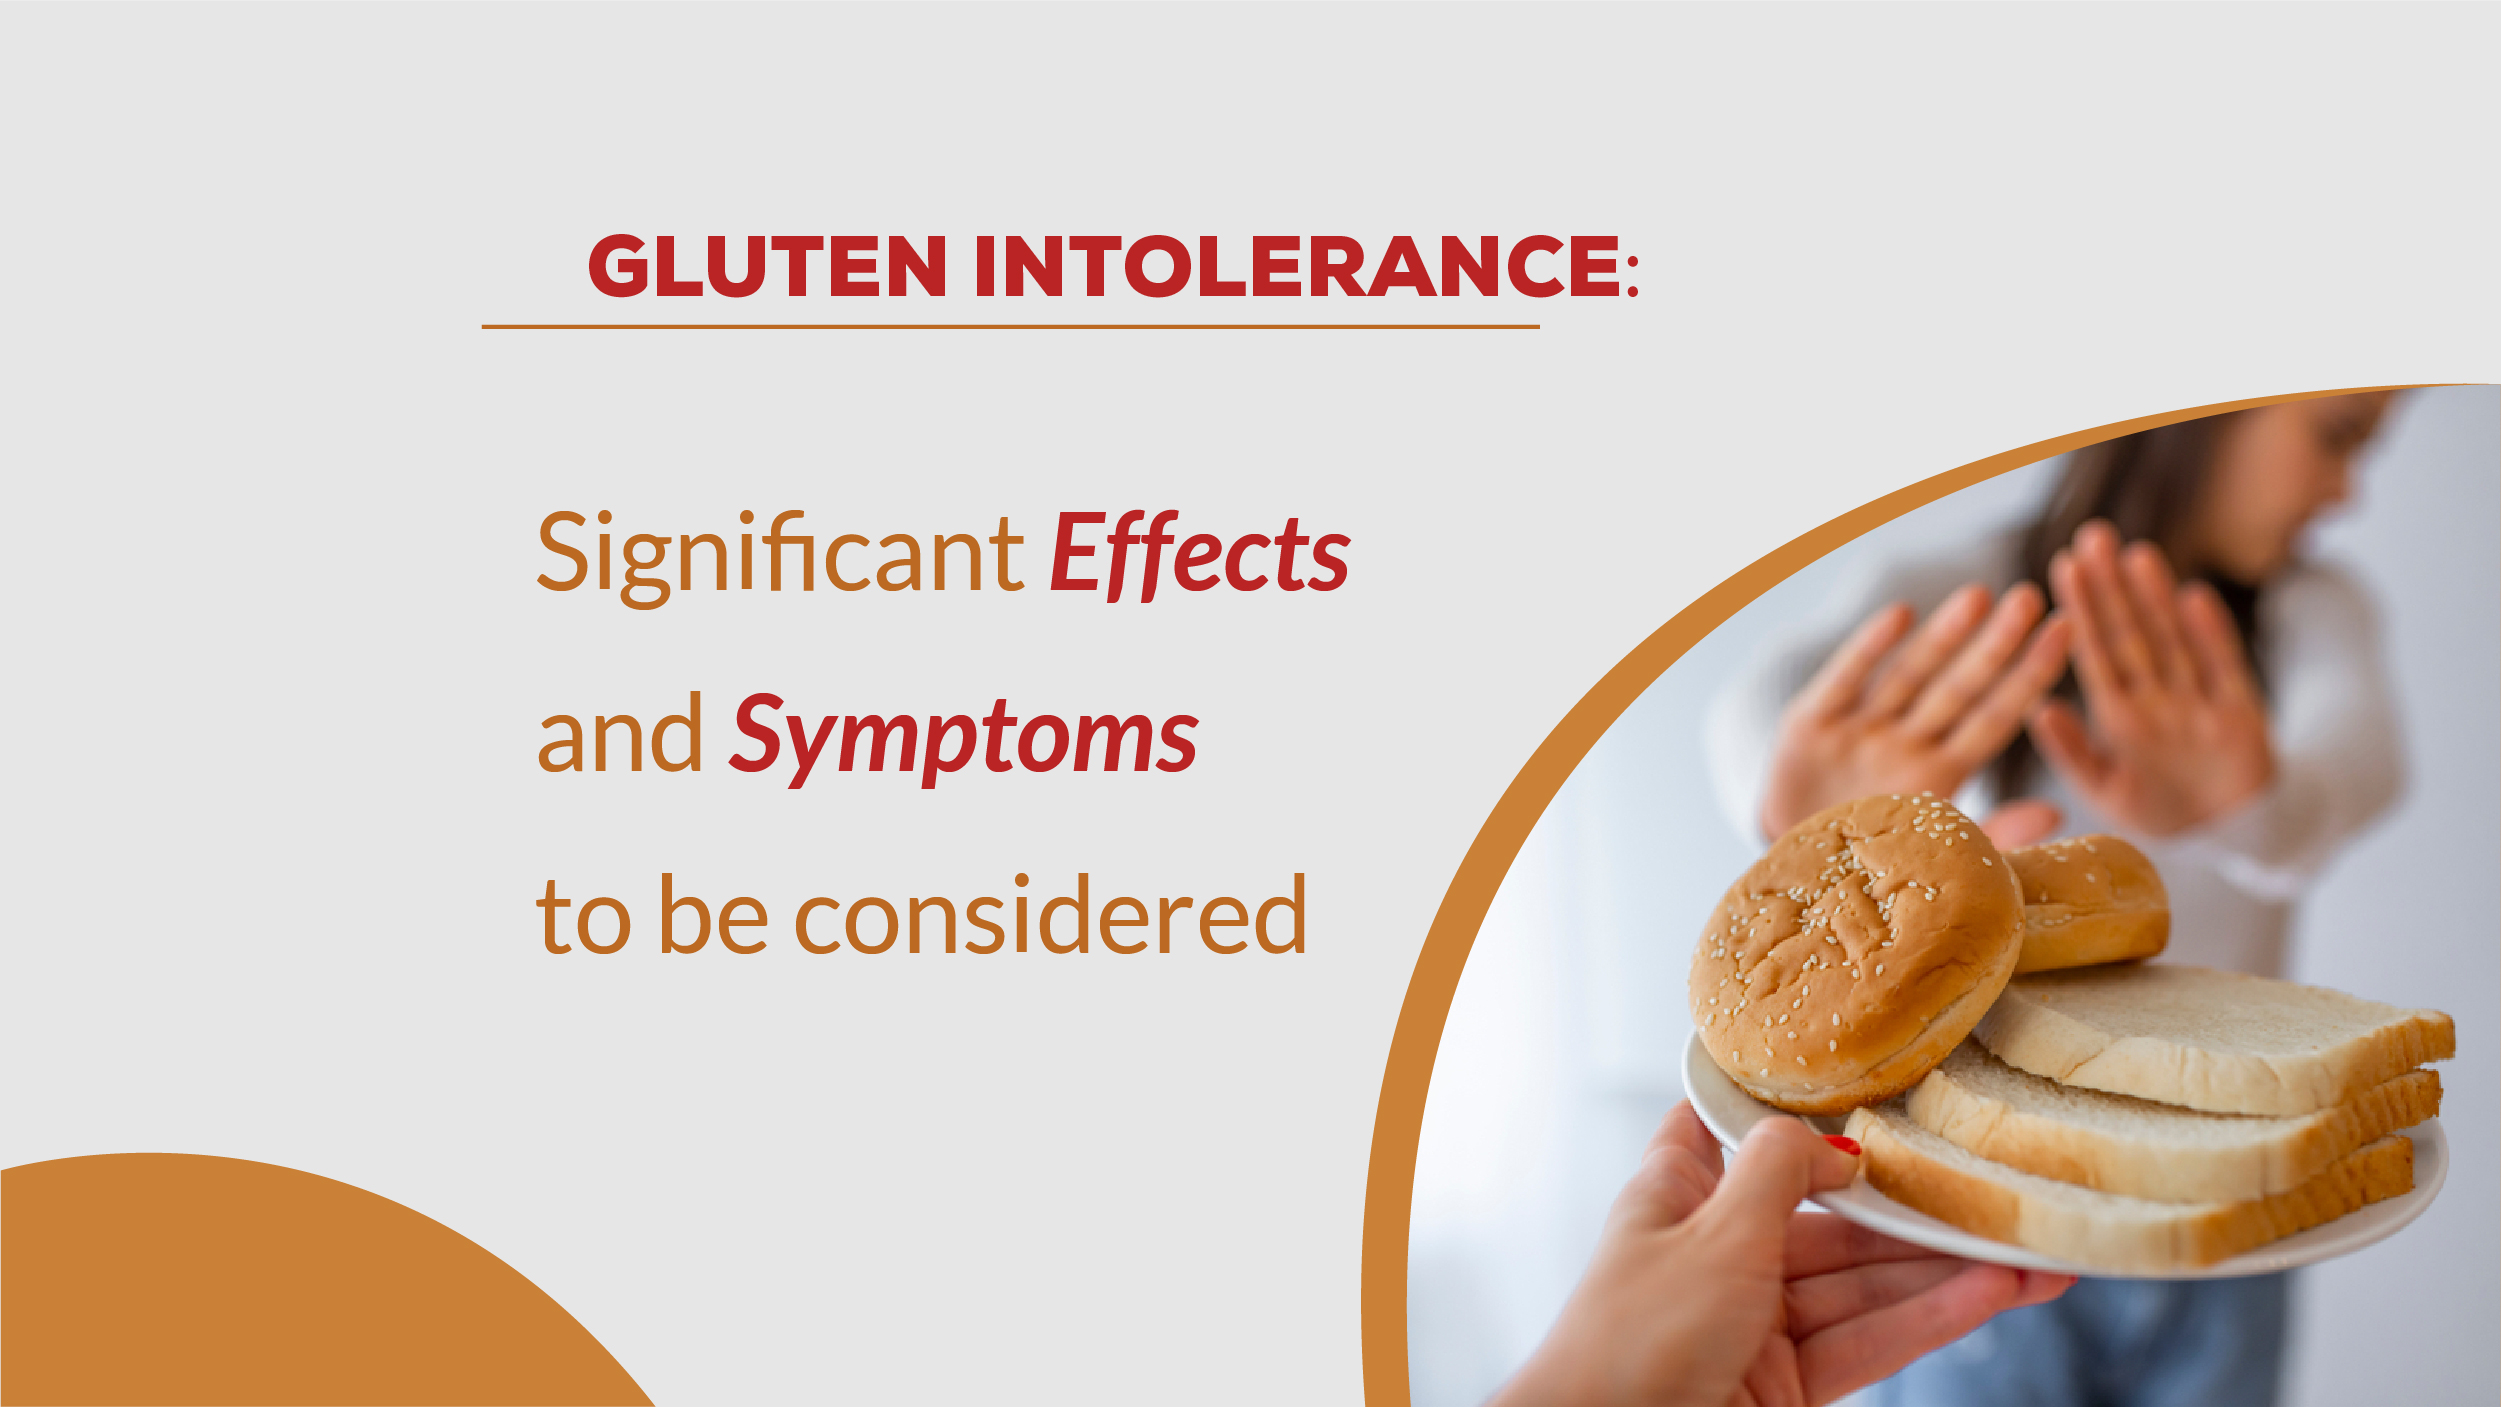 Gluten Intolerance: Significant effects and symptoms to be considered